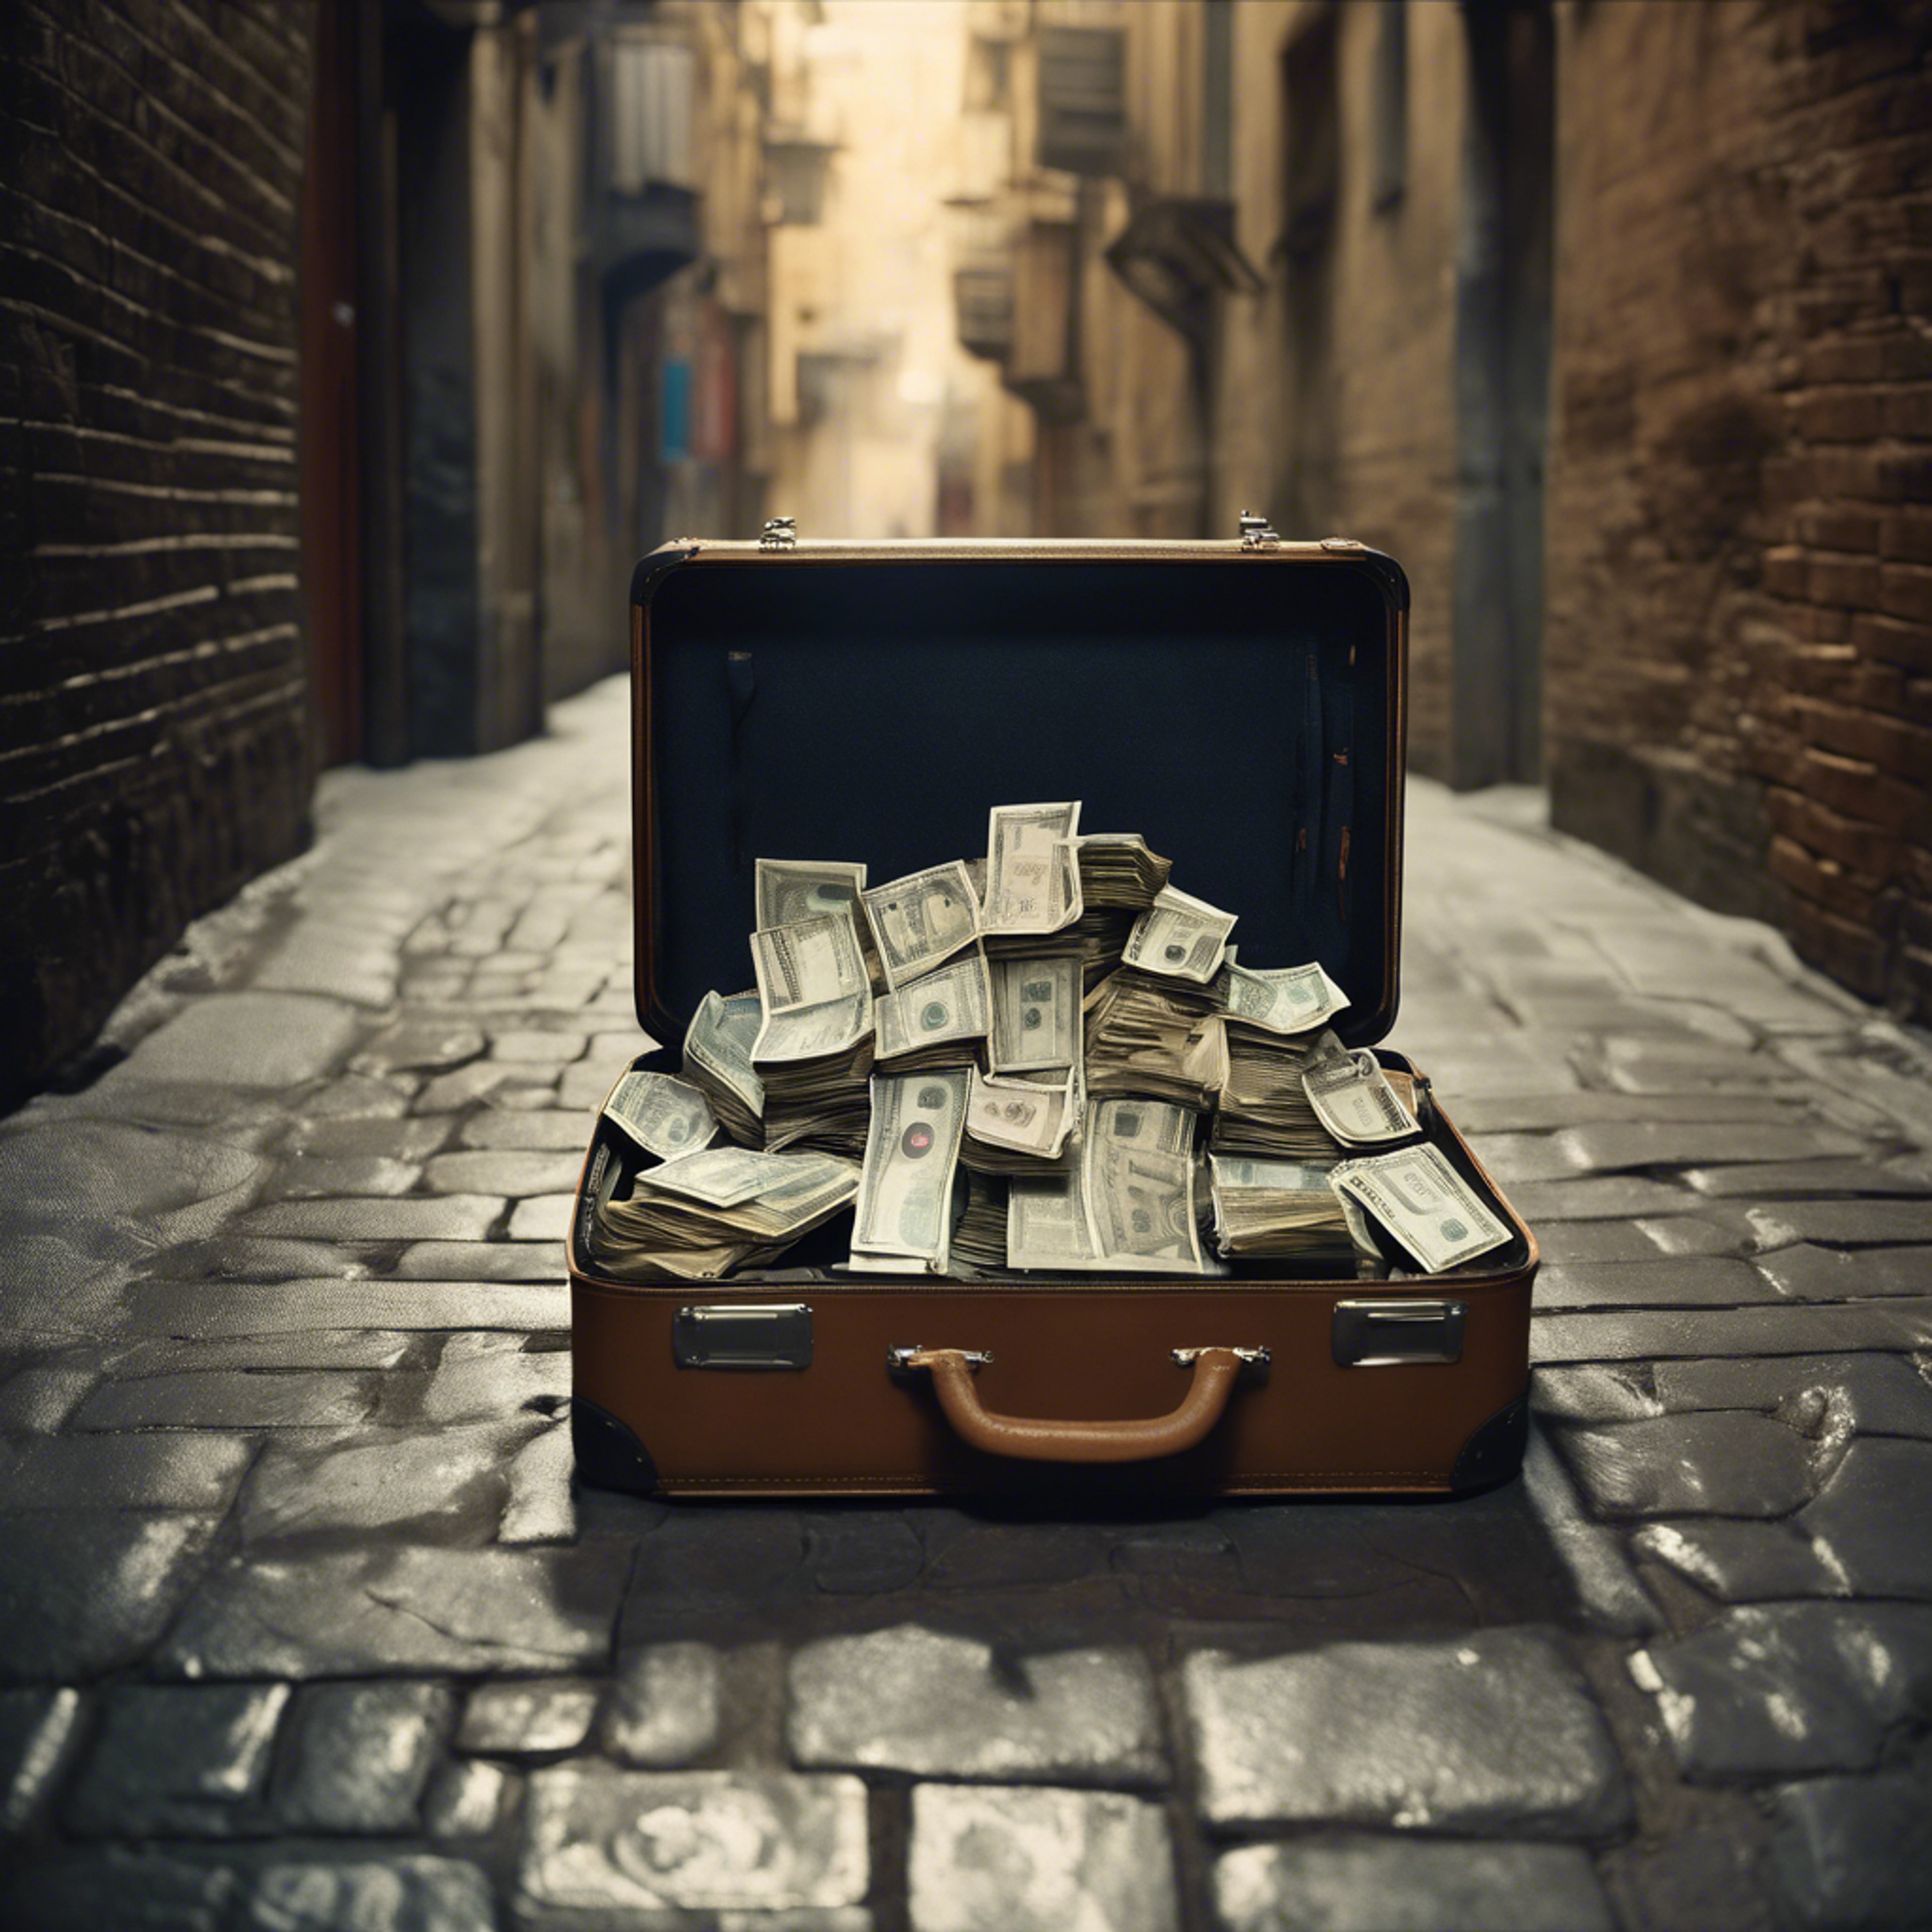 A suitcase filled with mafia money being exchanged in dimly lit alleyway. 墙纸[001aead7b2c840f5bbce]